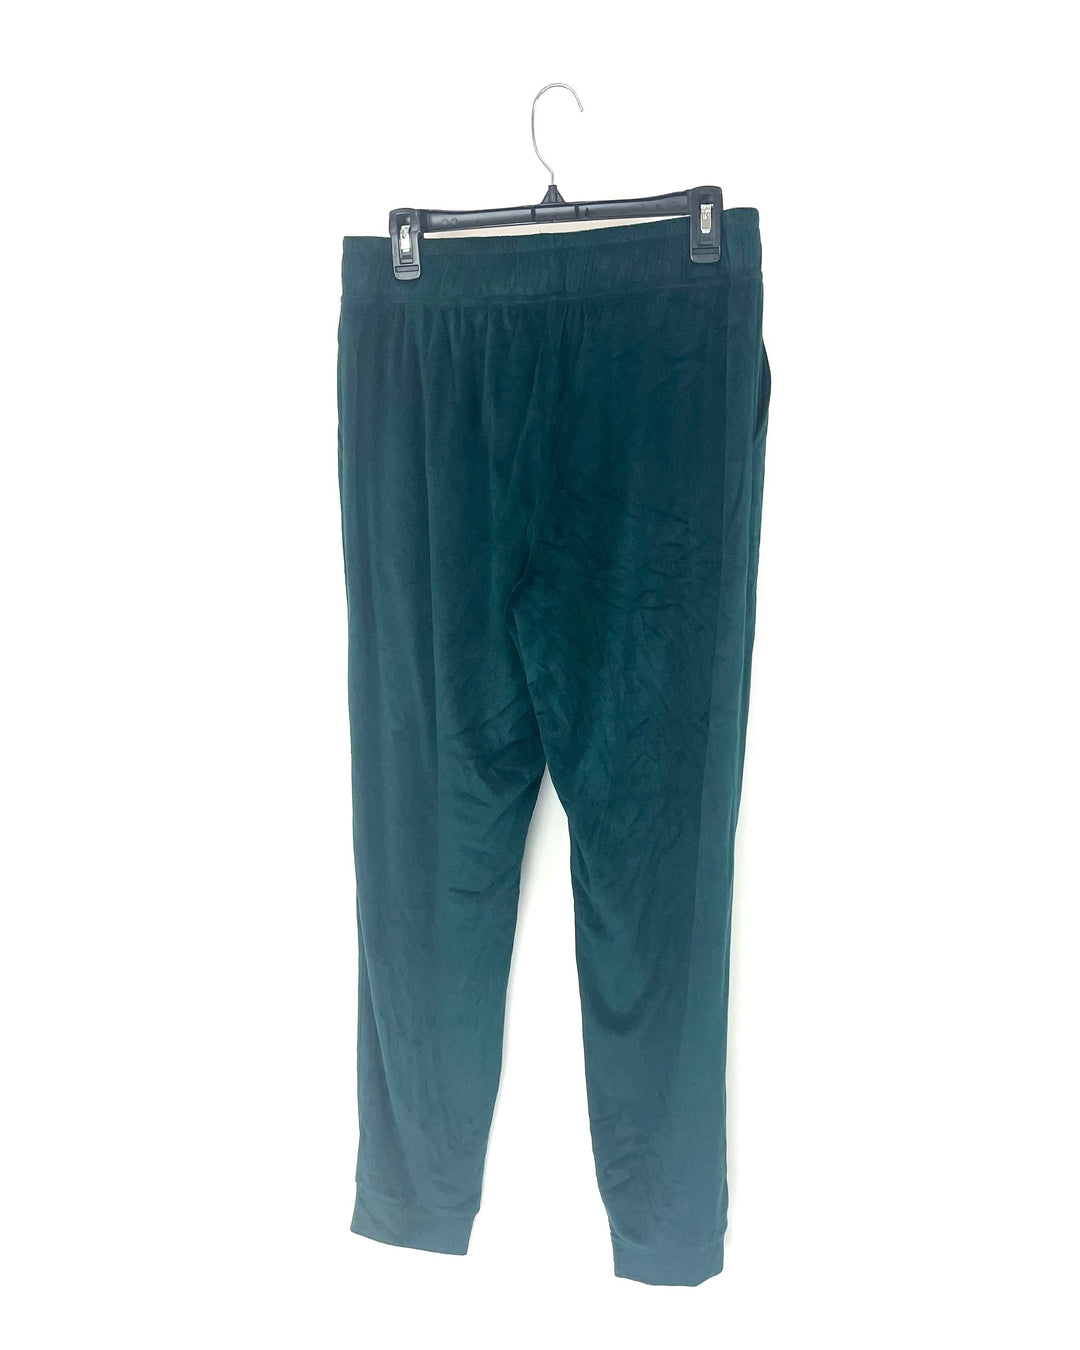 Soft Green Velour Joggers - Size 10/12